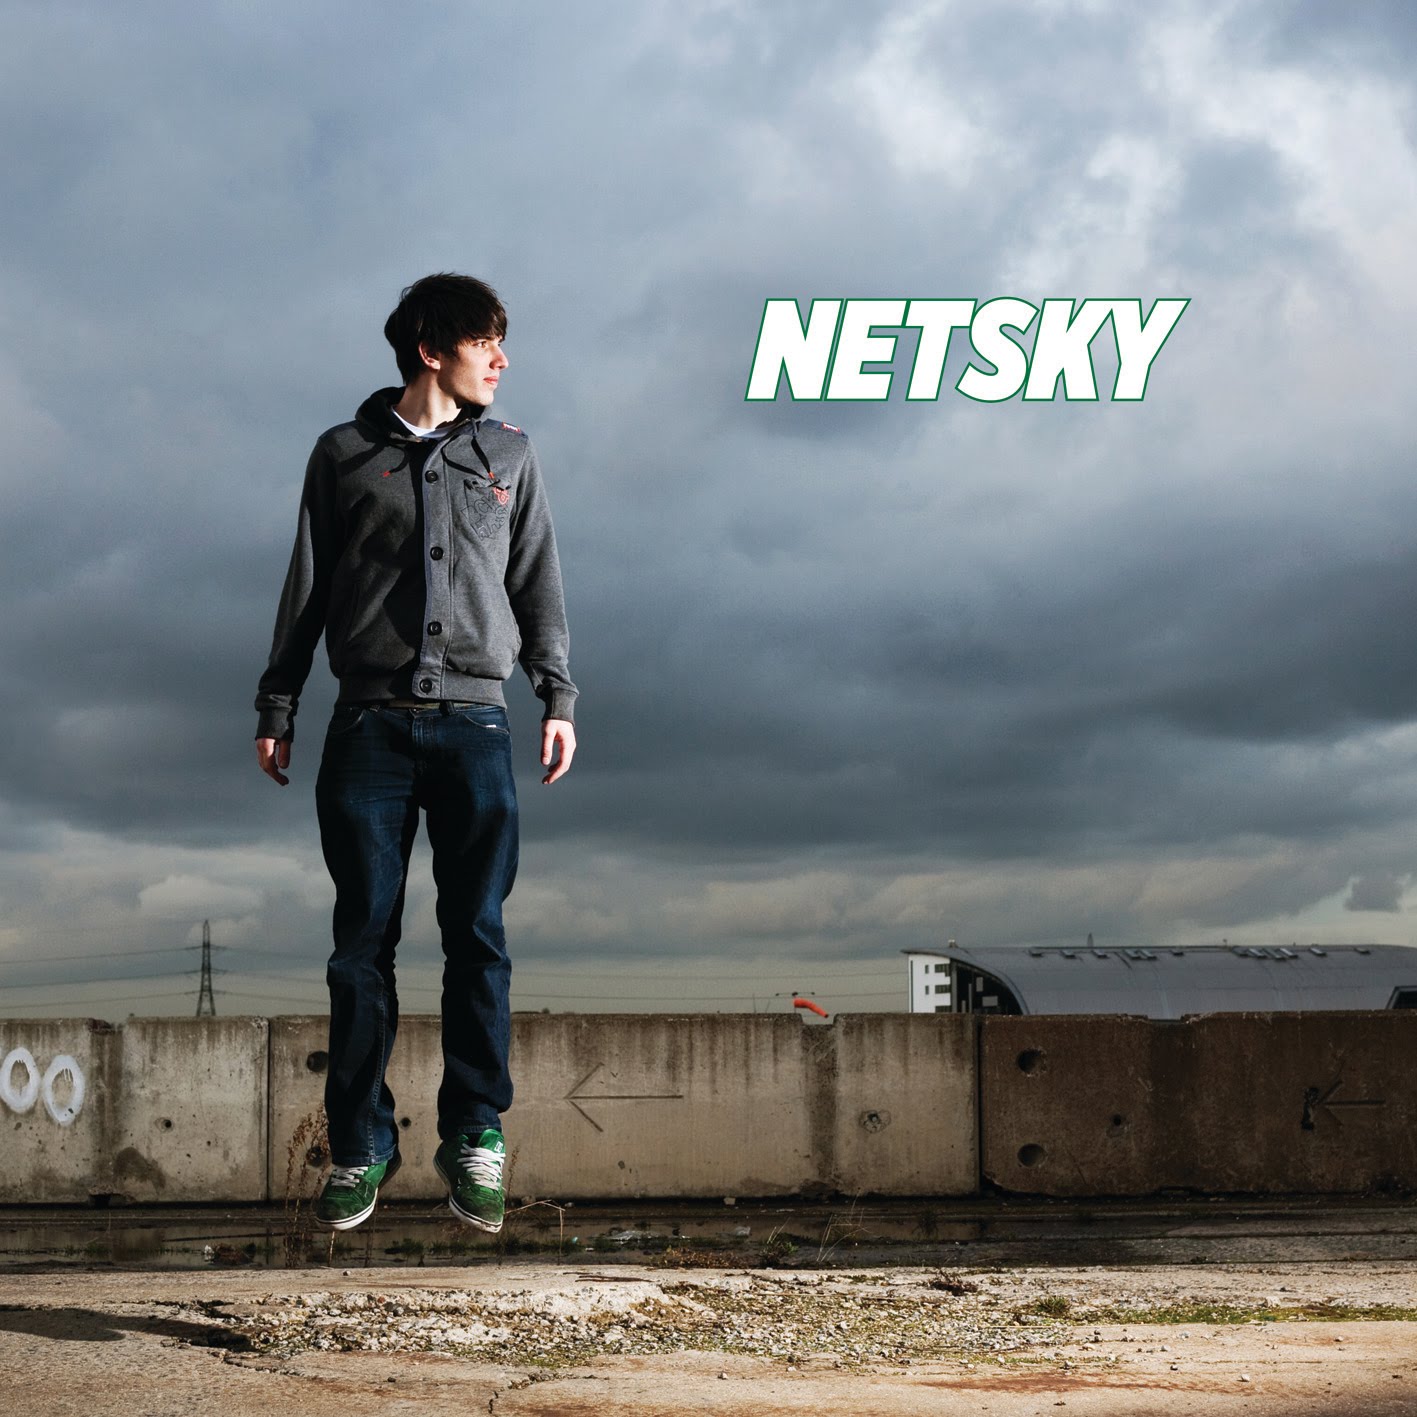 Maybe Netsky's album, I dunno, I can't be bothered to think of all my favourite albums. This was the first thing that came to my head. 